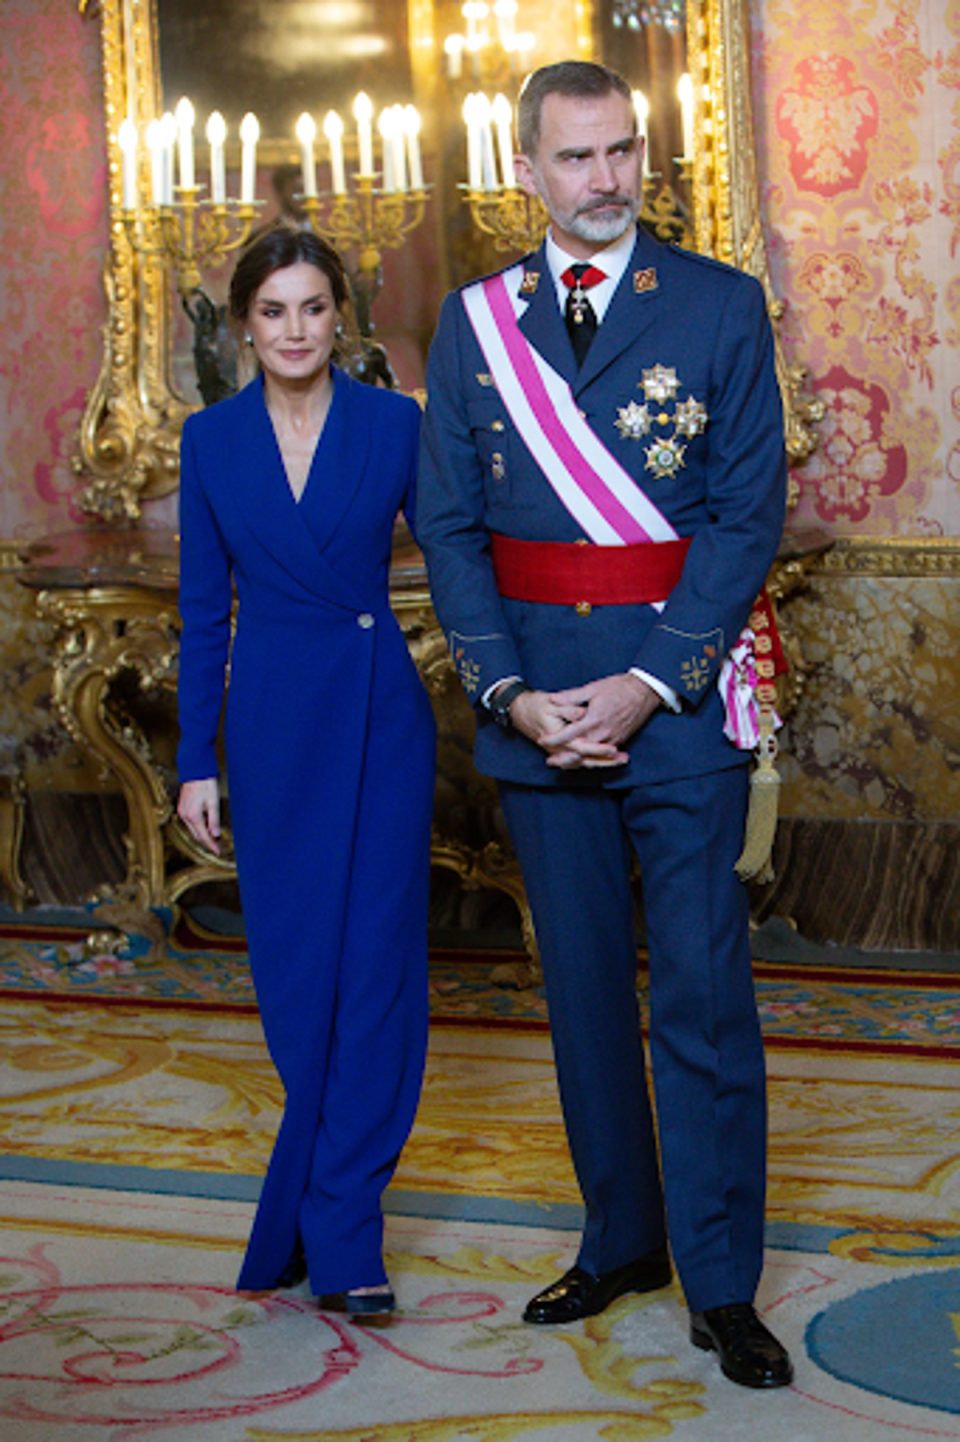 King Felipe VI and Queen Letizia of Spain are expected to be in attendance (Getty Images)